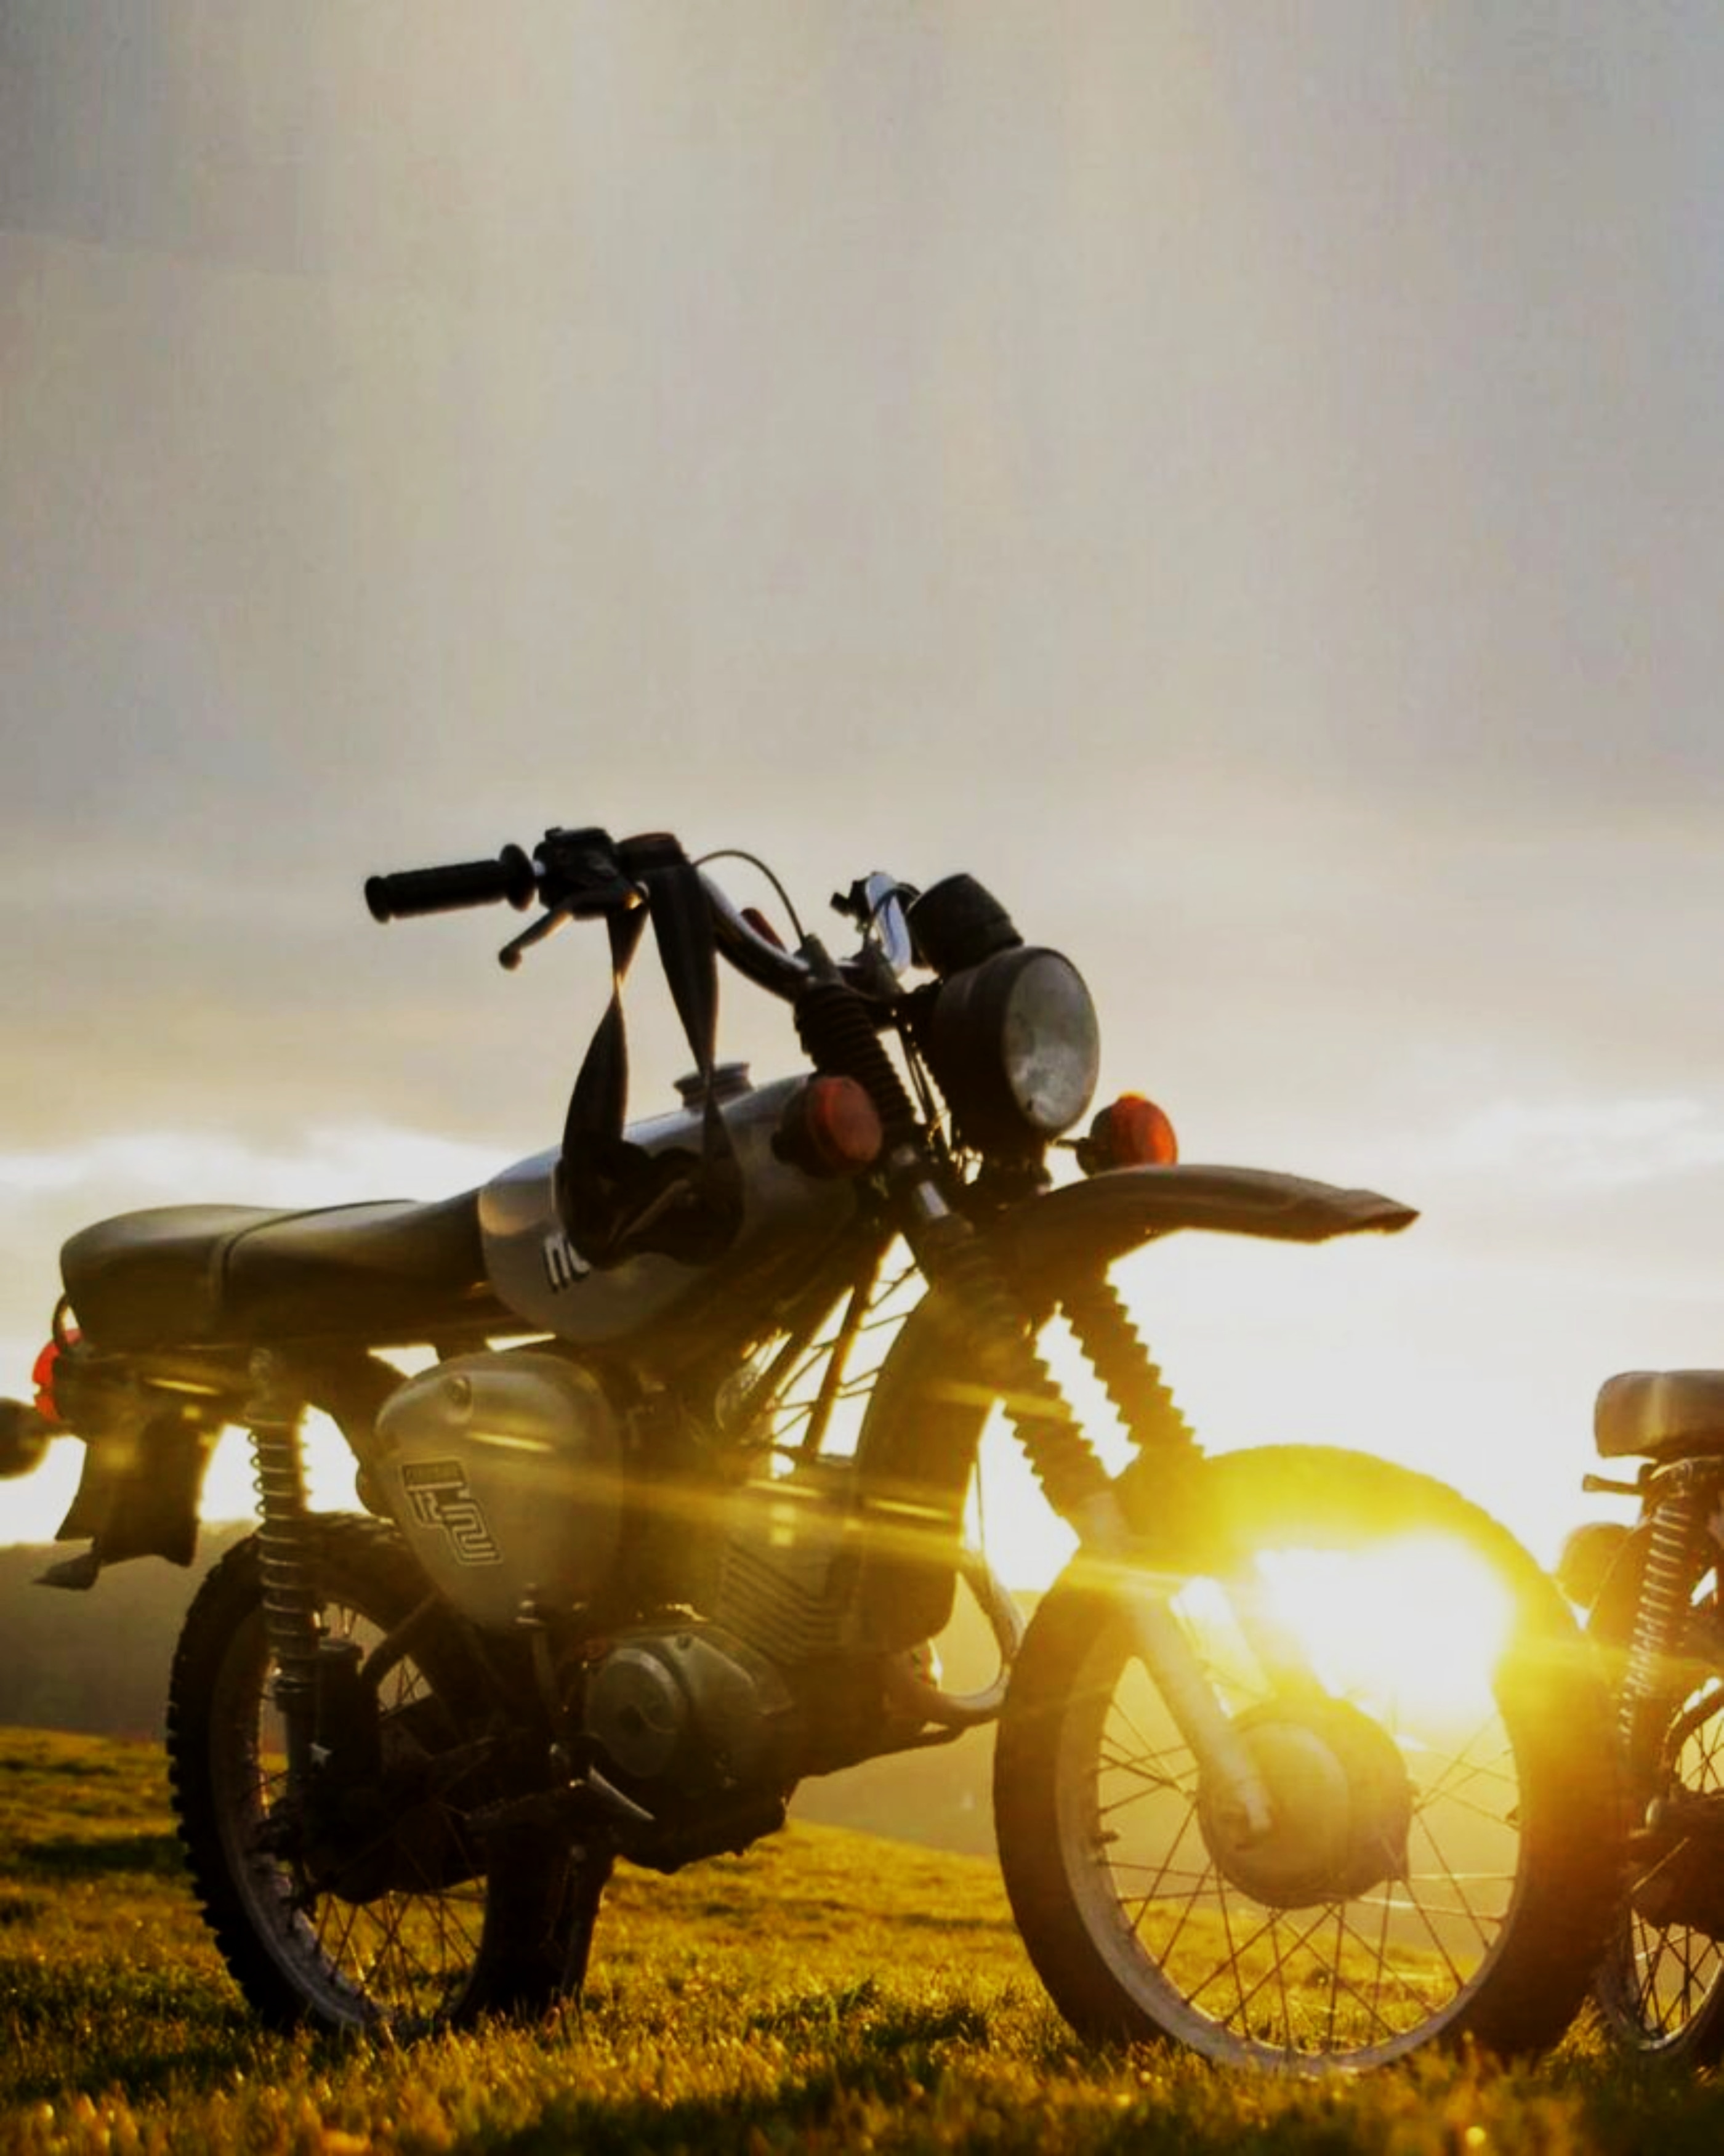 You are currently viewing Bike editing background download for free